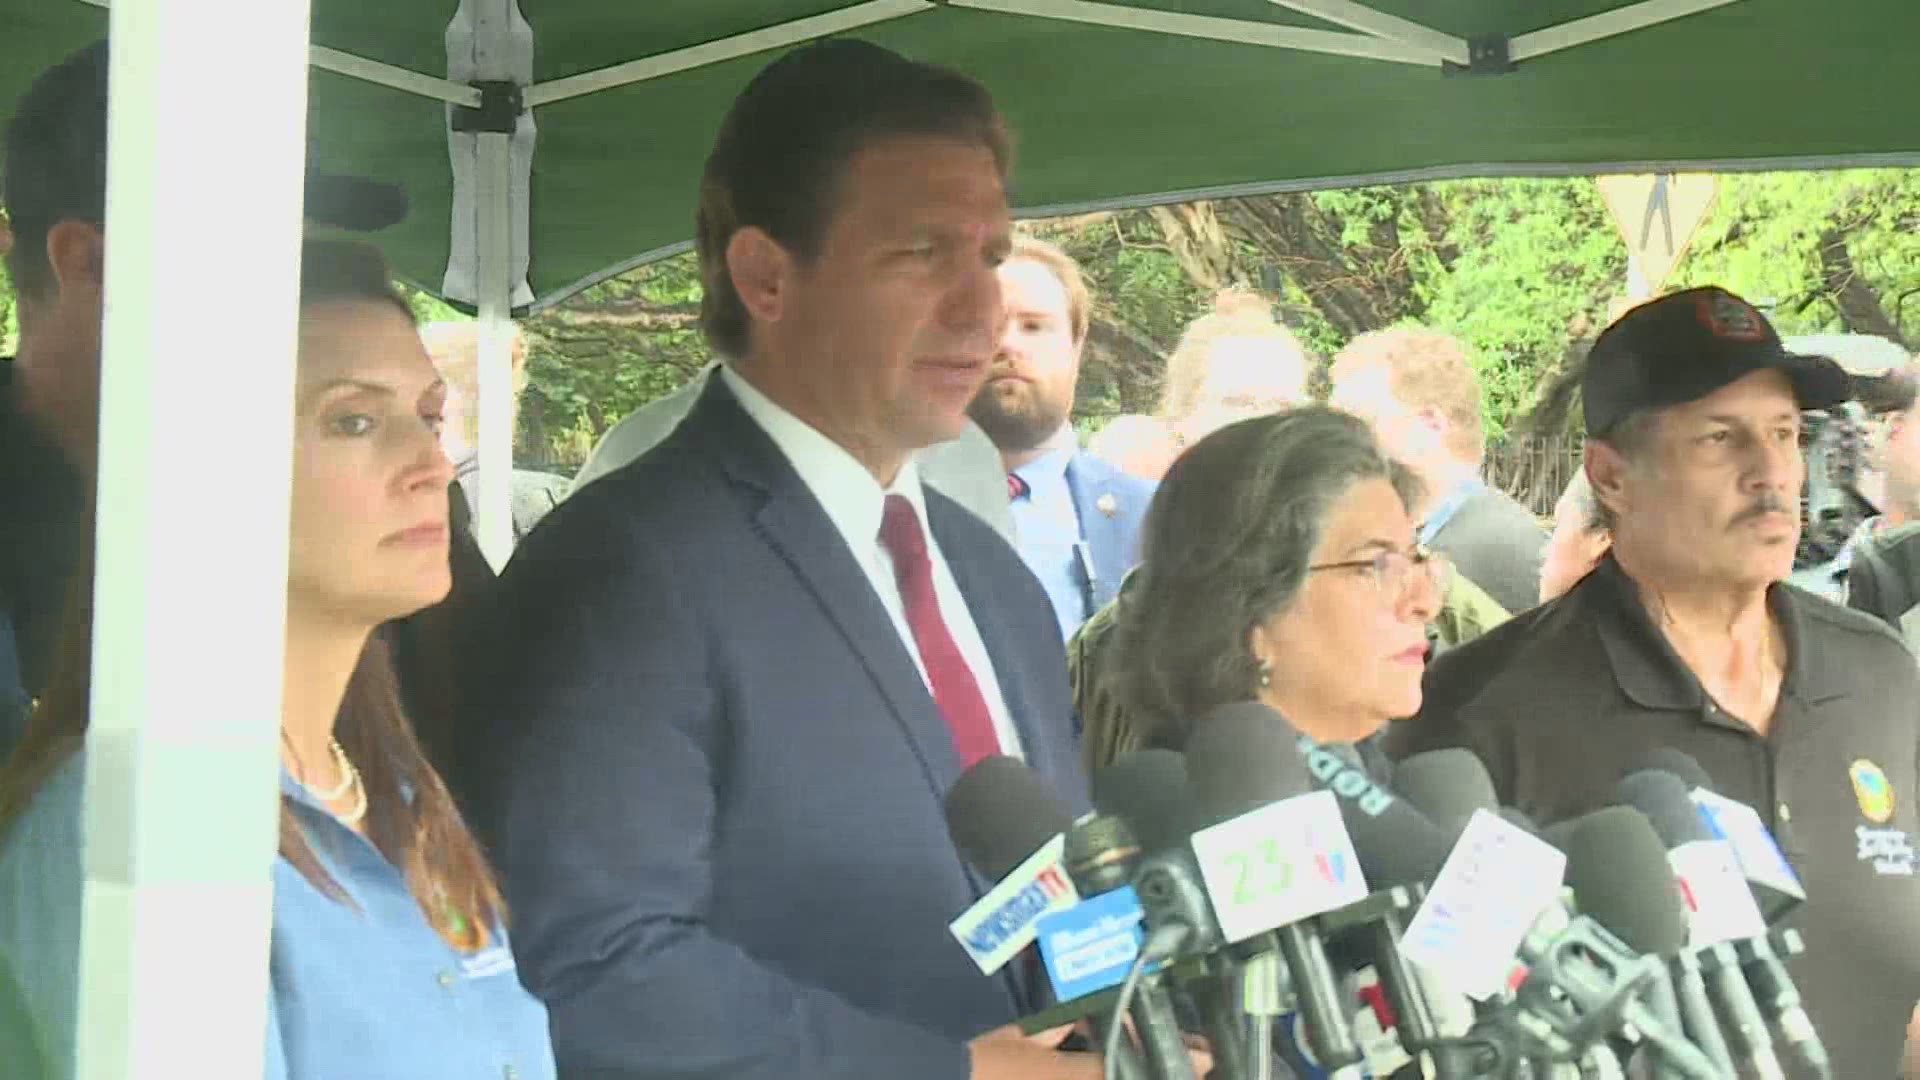 "The TV doesn't do it justice, it is really really traumatic to see the collapse of a massive structure like that," said DeSantis.